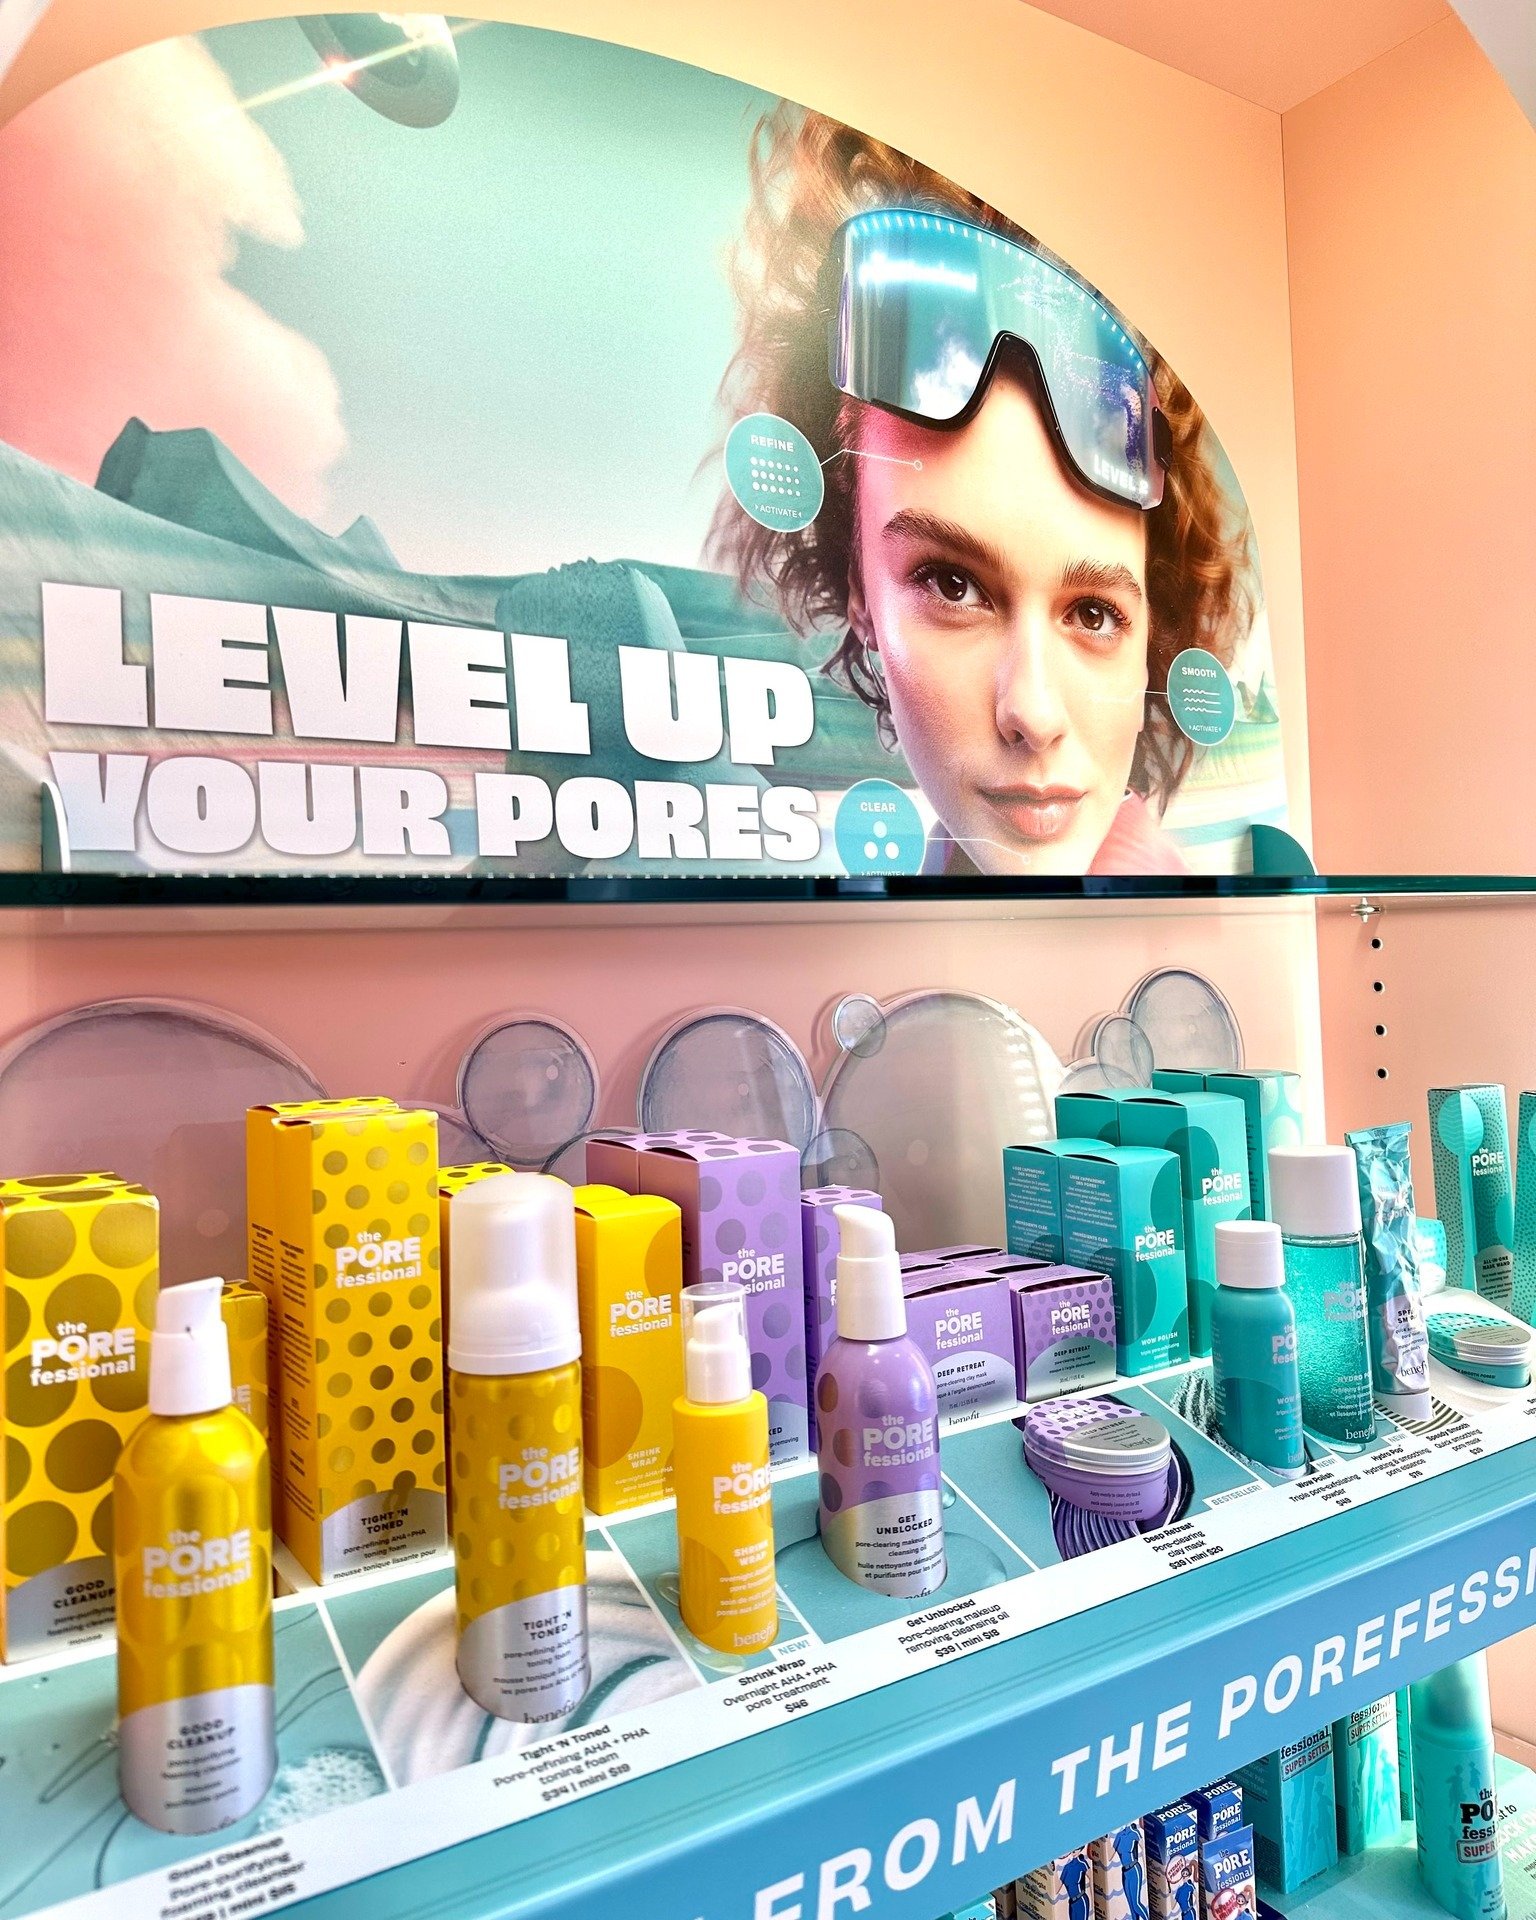 It's time to level up! ⬆️ Join @benefitcosmetics' Pore Care Party on Saturday, April 13 for champagne, trail mix and sparking water while shopping 🛍️💄 Make sure to check out their newest Pore Care products during the Pore Promotion (now through 4/2